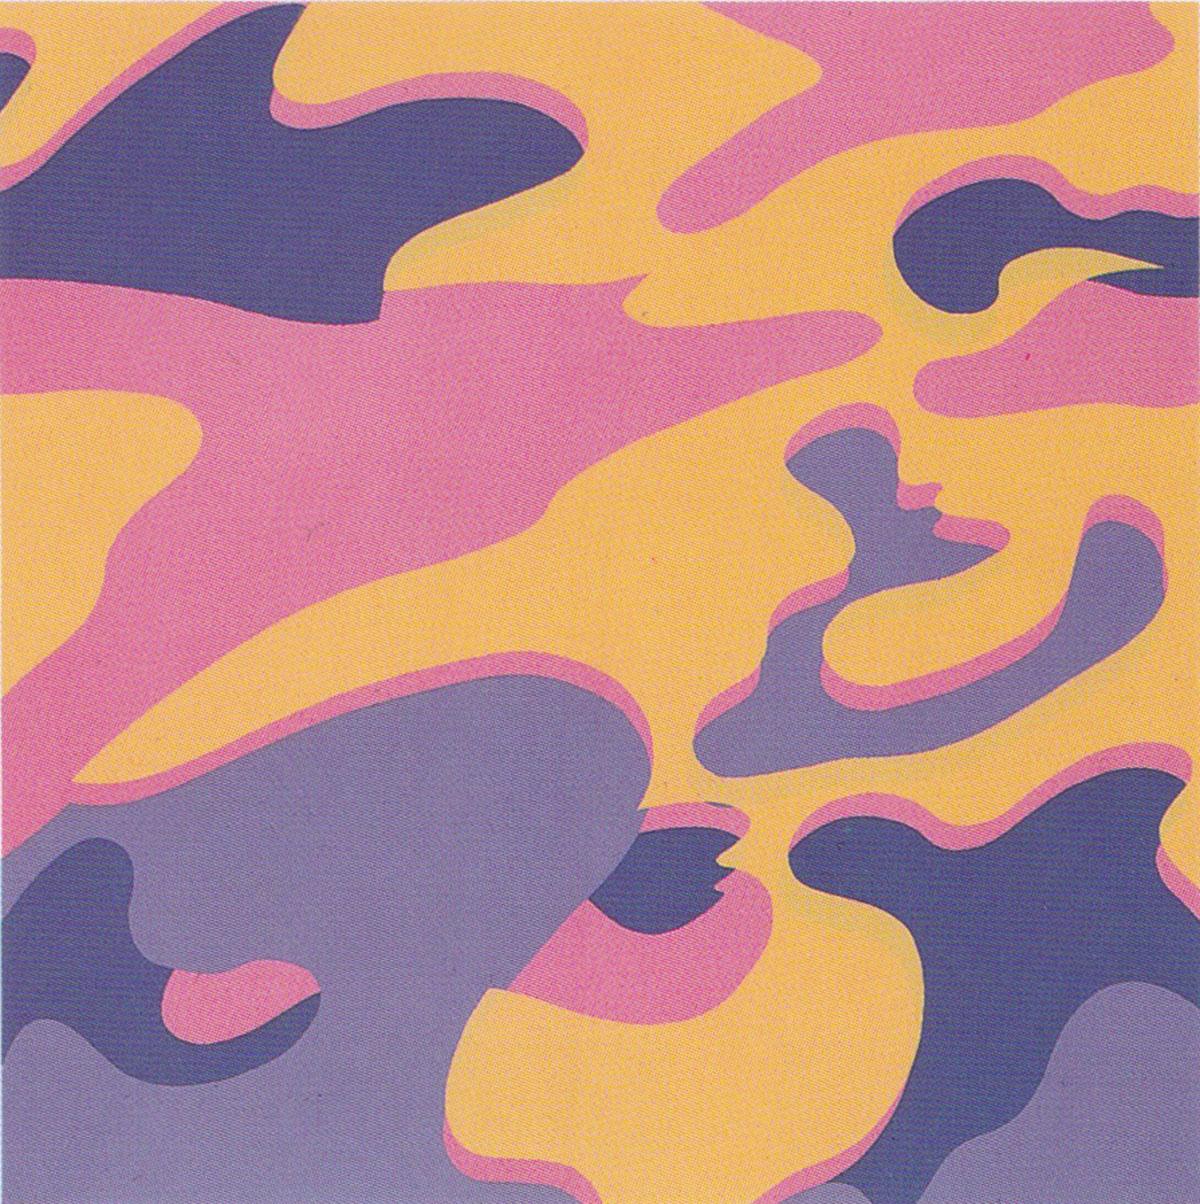 Camouflage (FS II.410) - Print by Andy Warhol